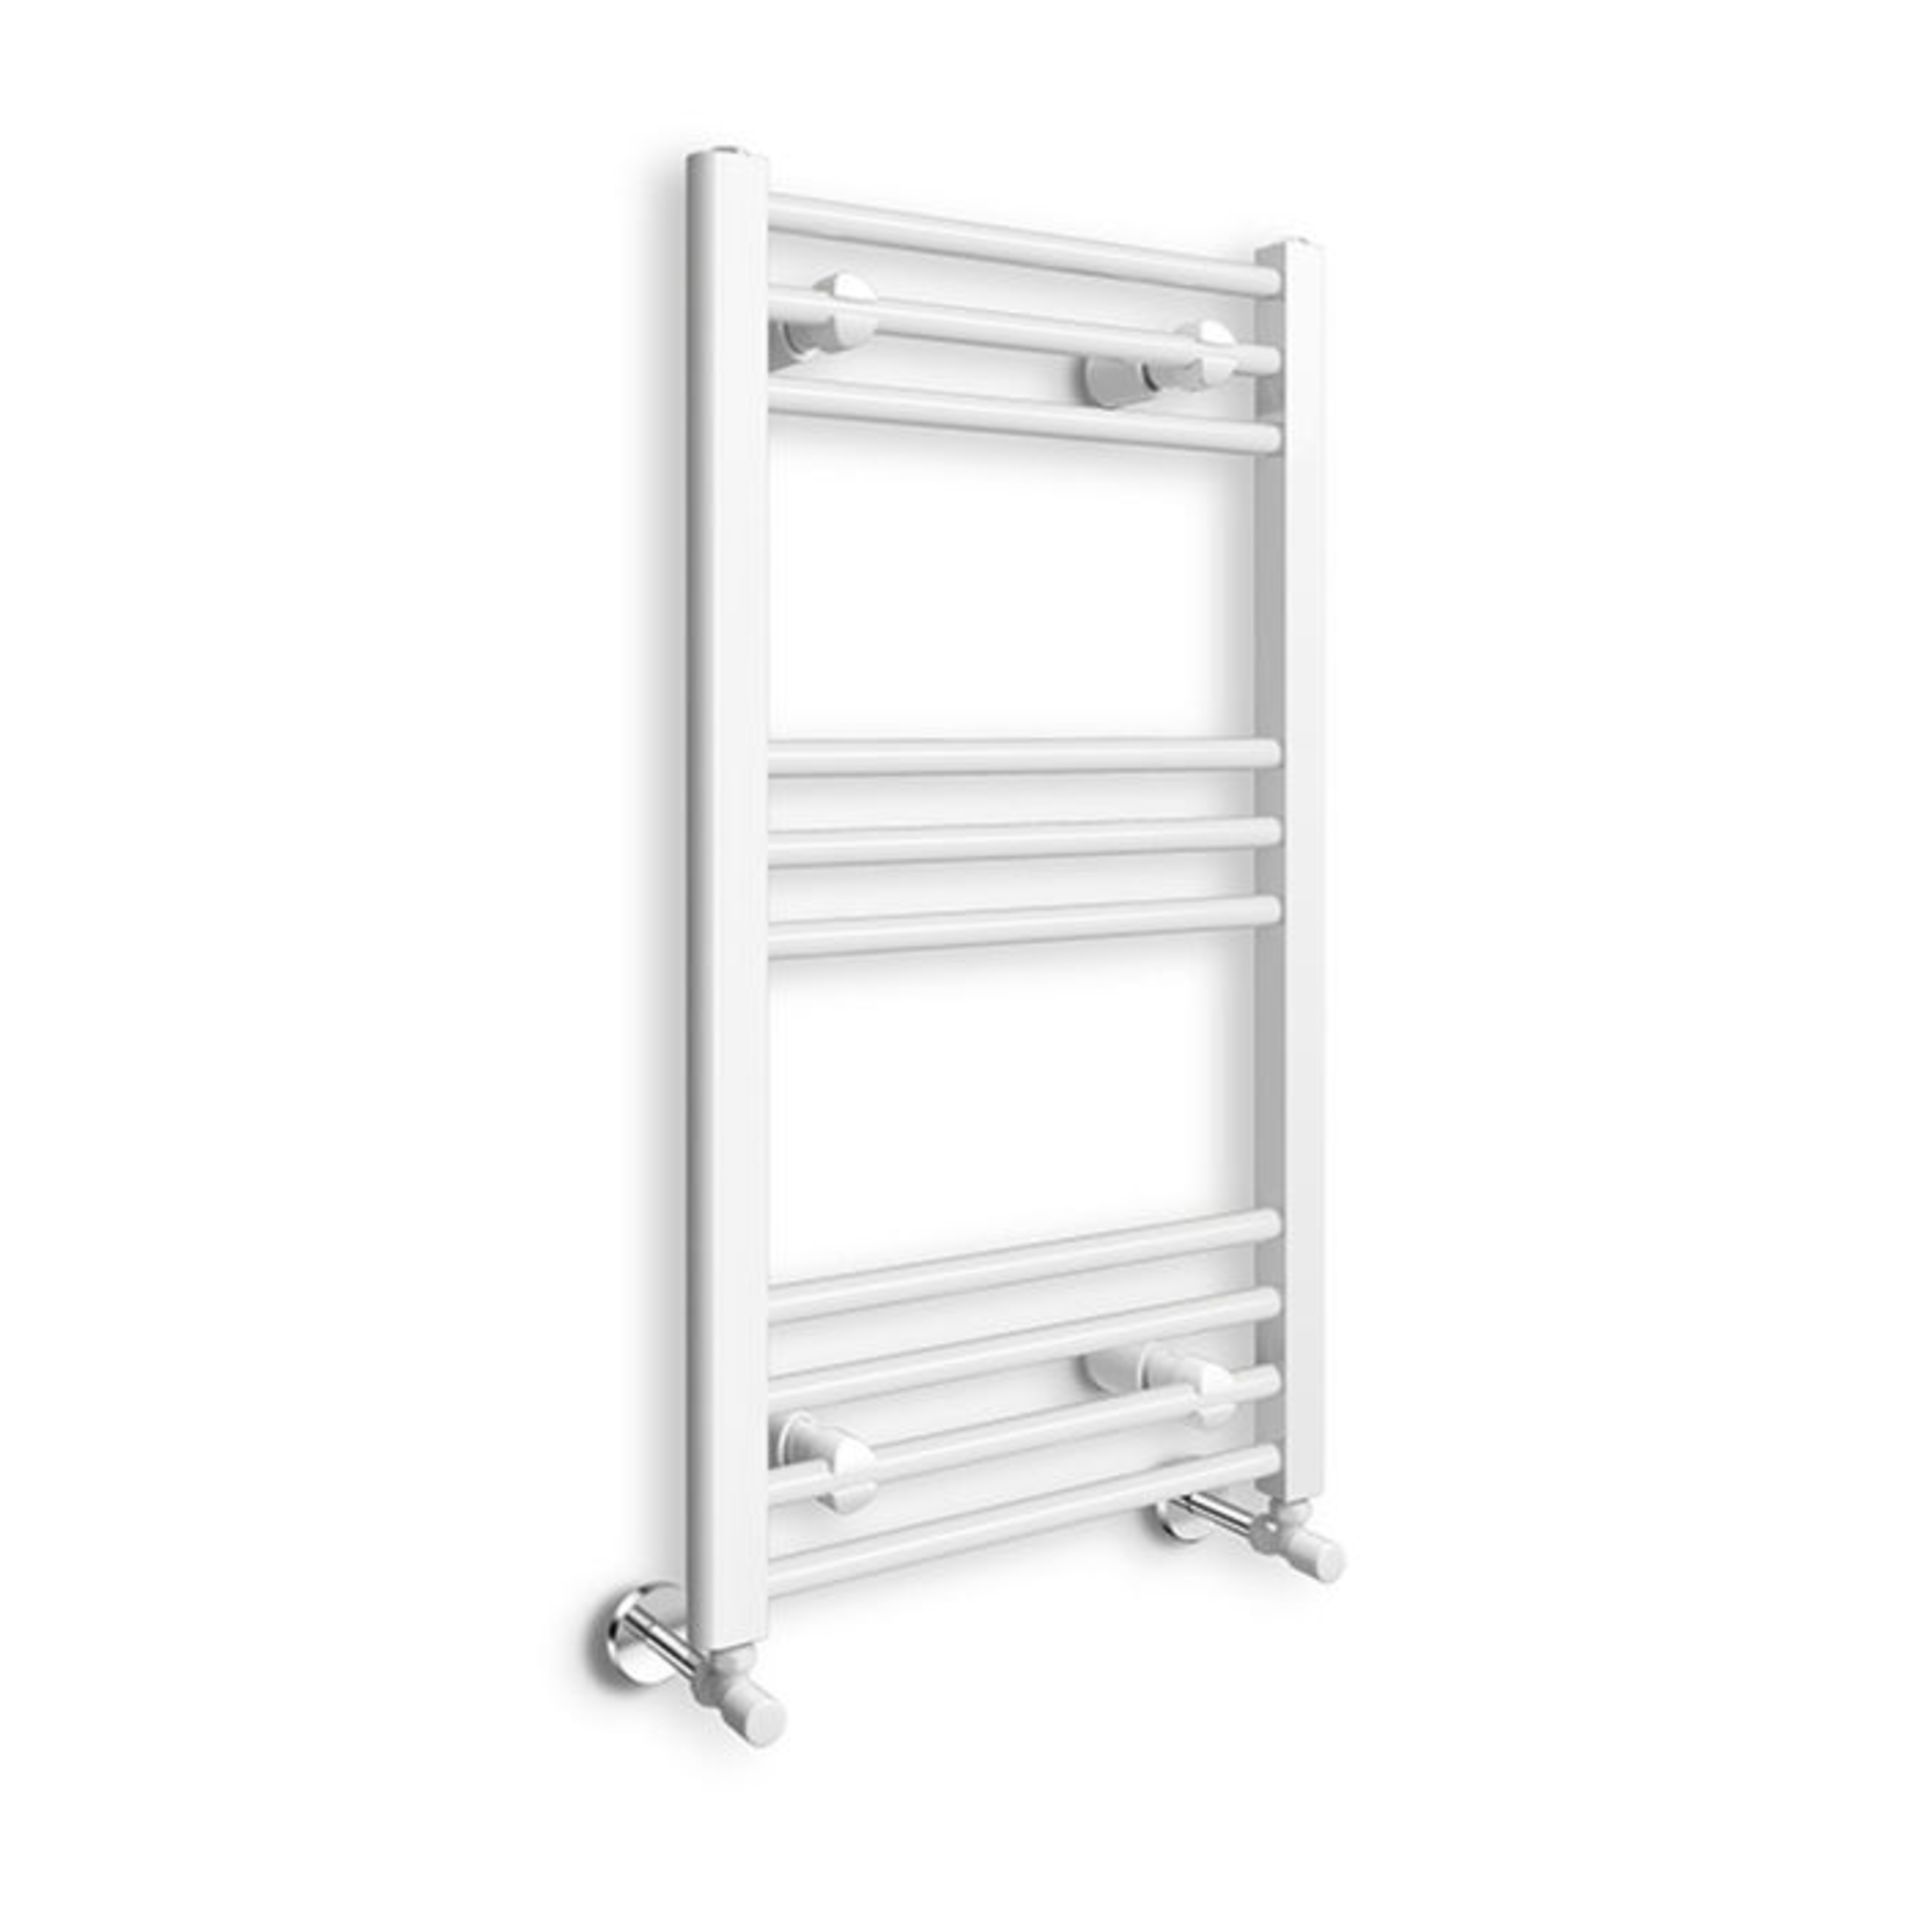 (EW19) 800x450mm White Heated Towel Radiator. Made from low carbon steel Finished with a high